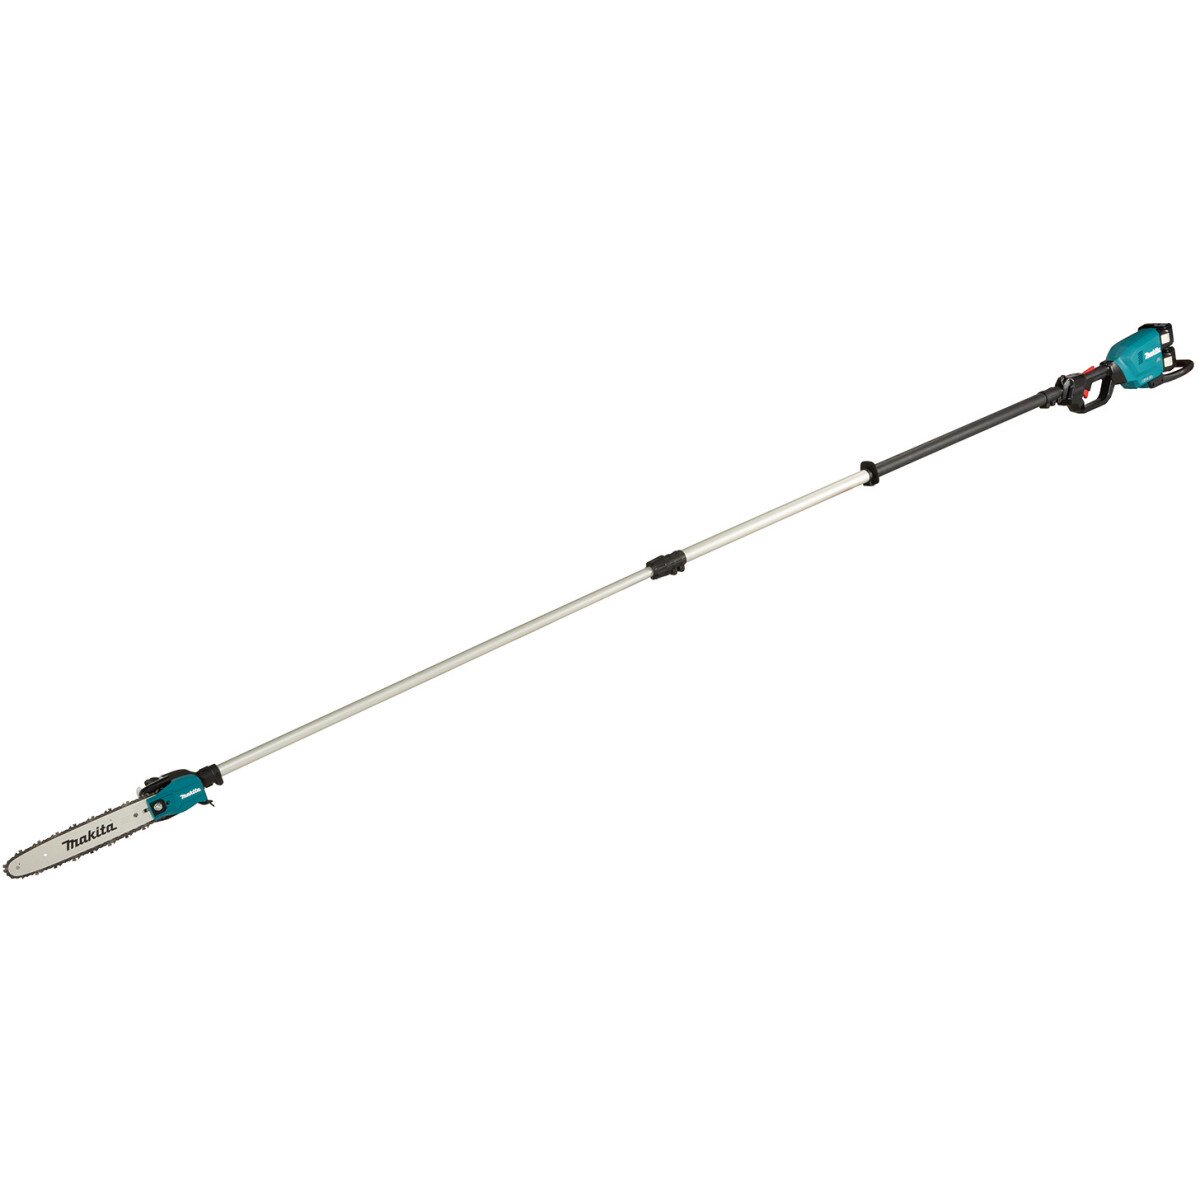 Makita DUA301PG2 Twin 18V Brushless Telescopic Pole Saw with 2 x 6.0Ah Batteries and Twinport Charger